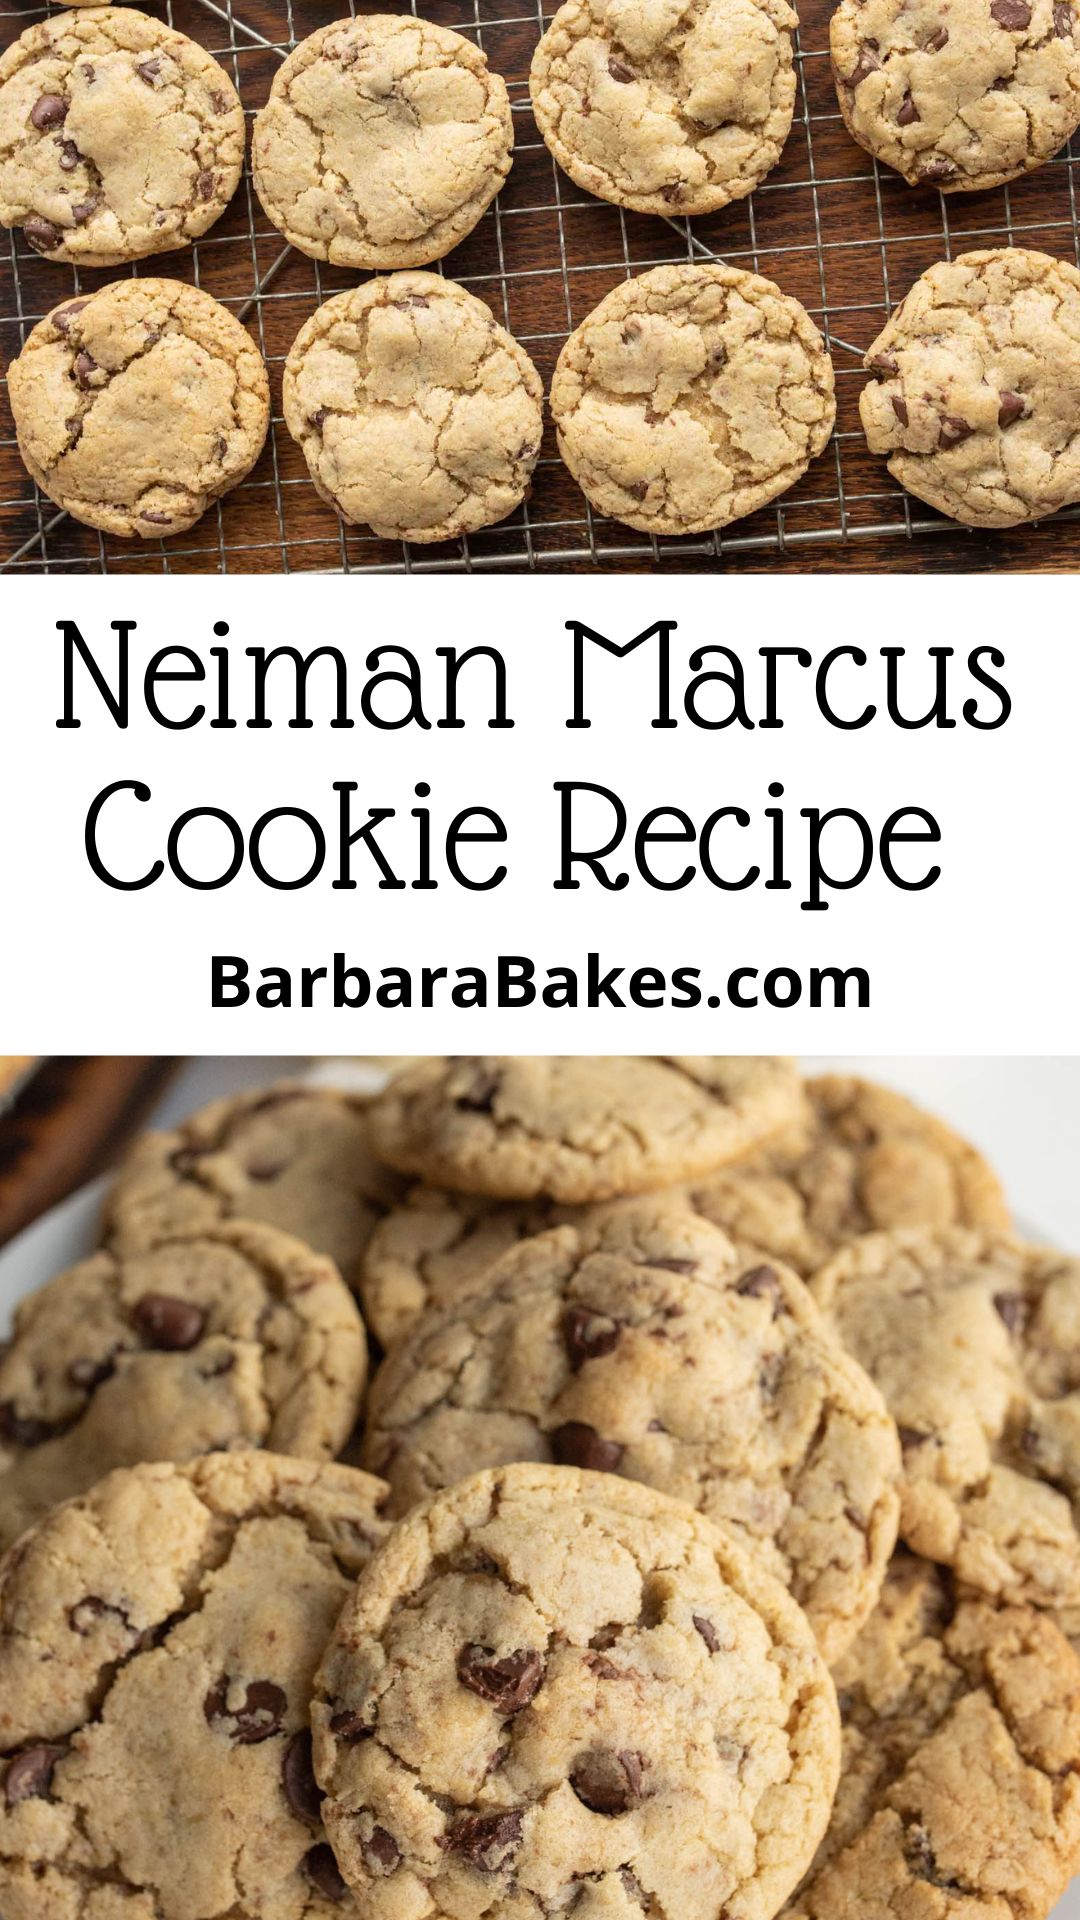 The famous Neiman Marcus Cookie Recipe! Blended oatmeal and a grated chocolate bar make this cookie extra special! via @barbarabakes